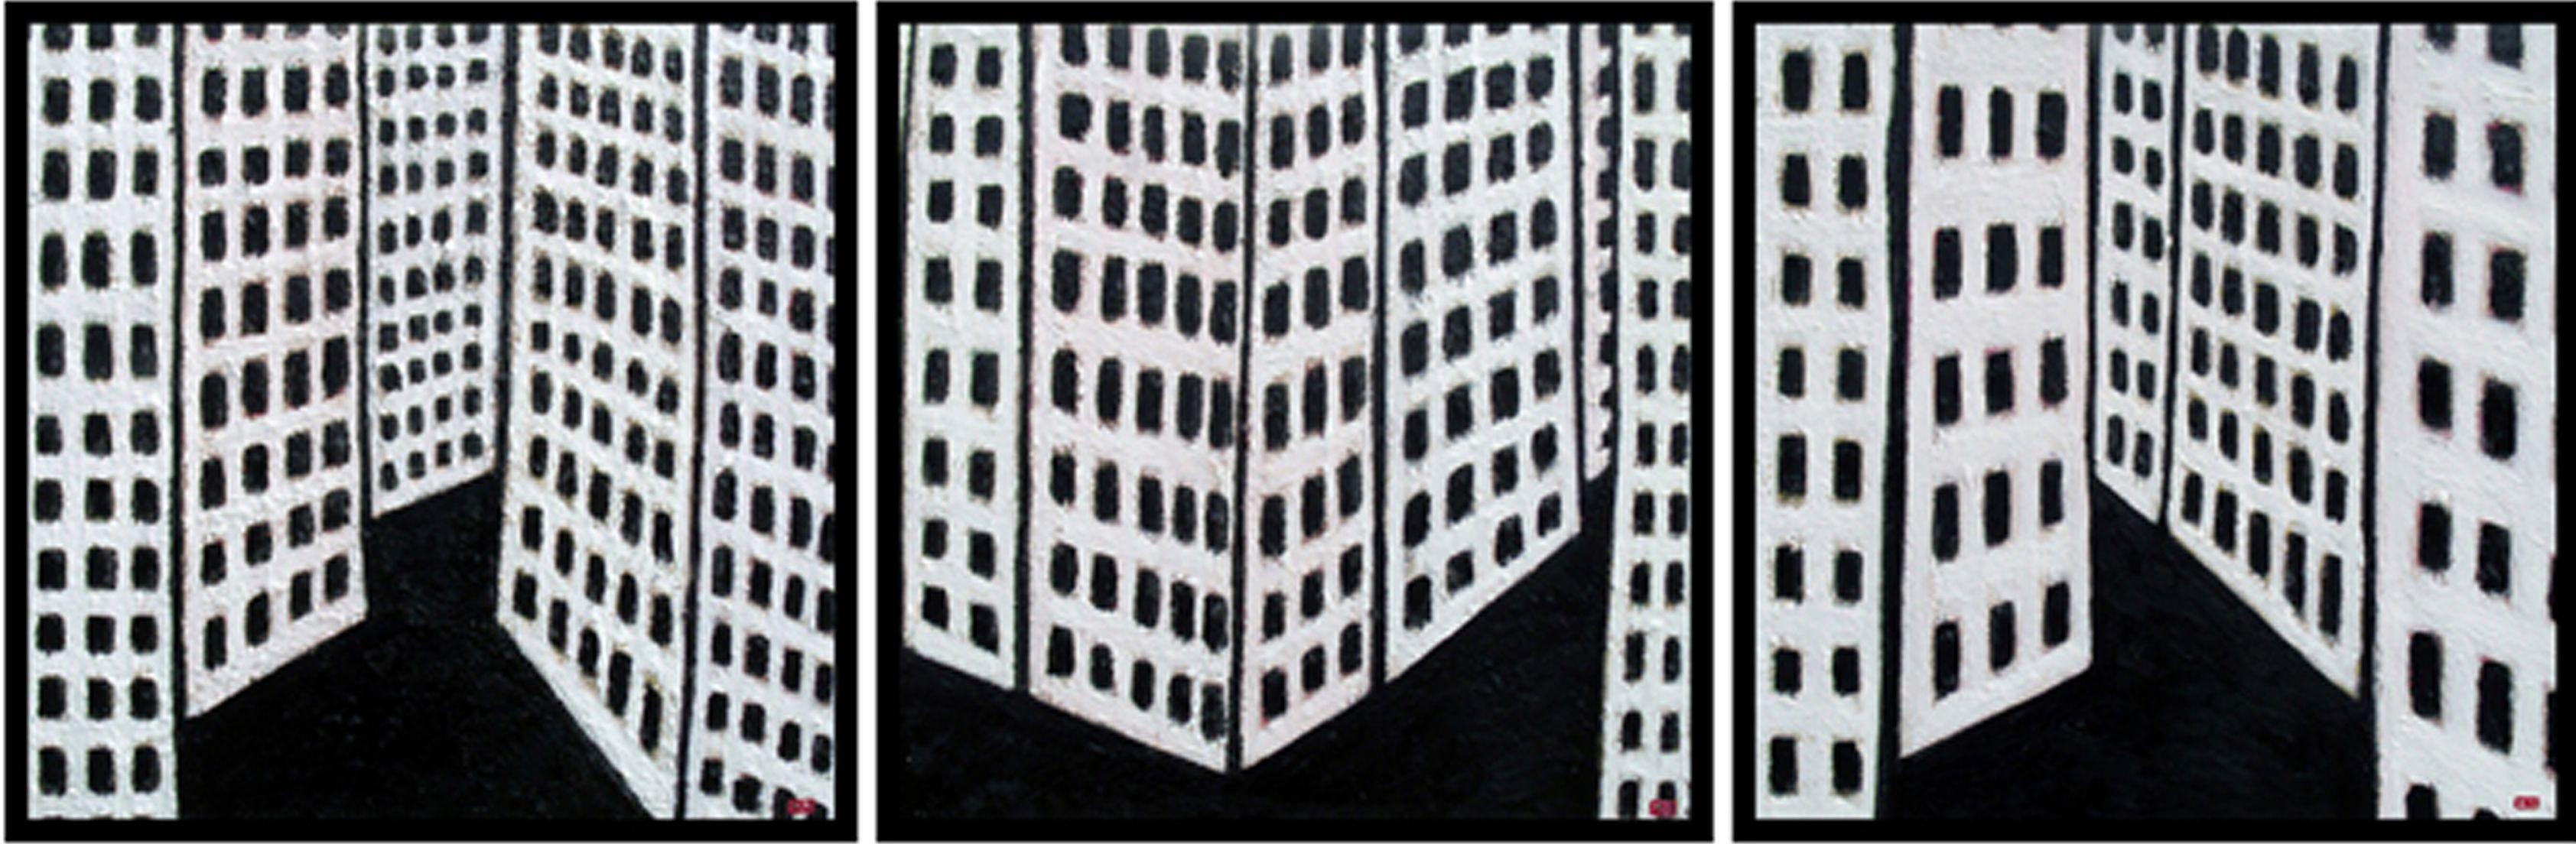 "City Blocks", part of Urban Patterns, bold, textured and Black & White Oil.  Panel individually framed                   (3) 24in x 24in each and allow for 1 inch spacing.    Note: The room mock-ups the painting is shown is often not in proportion